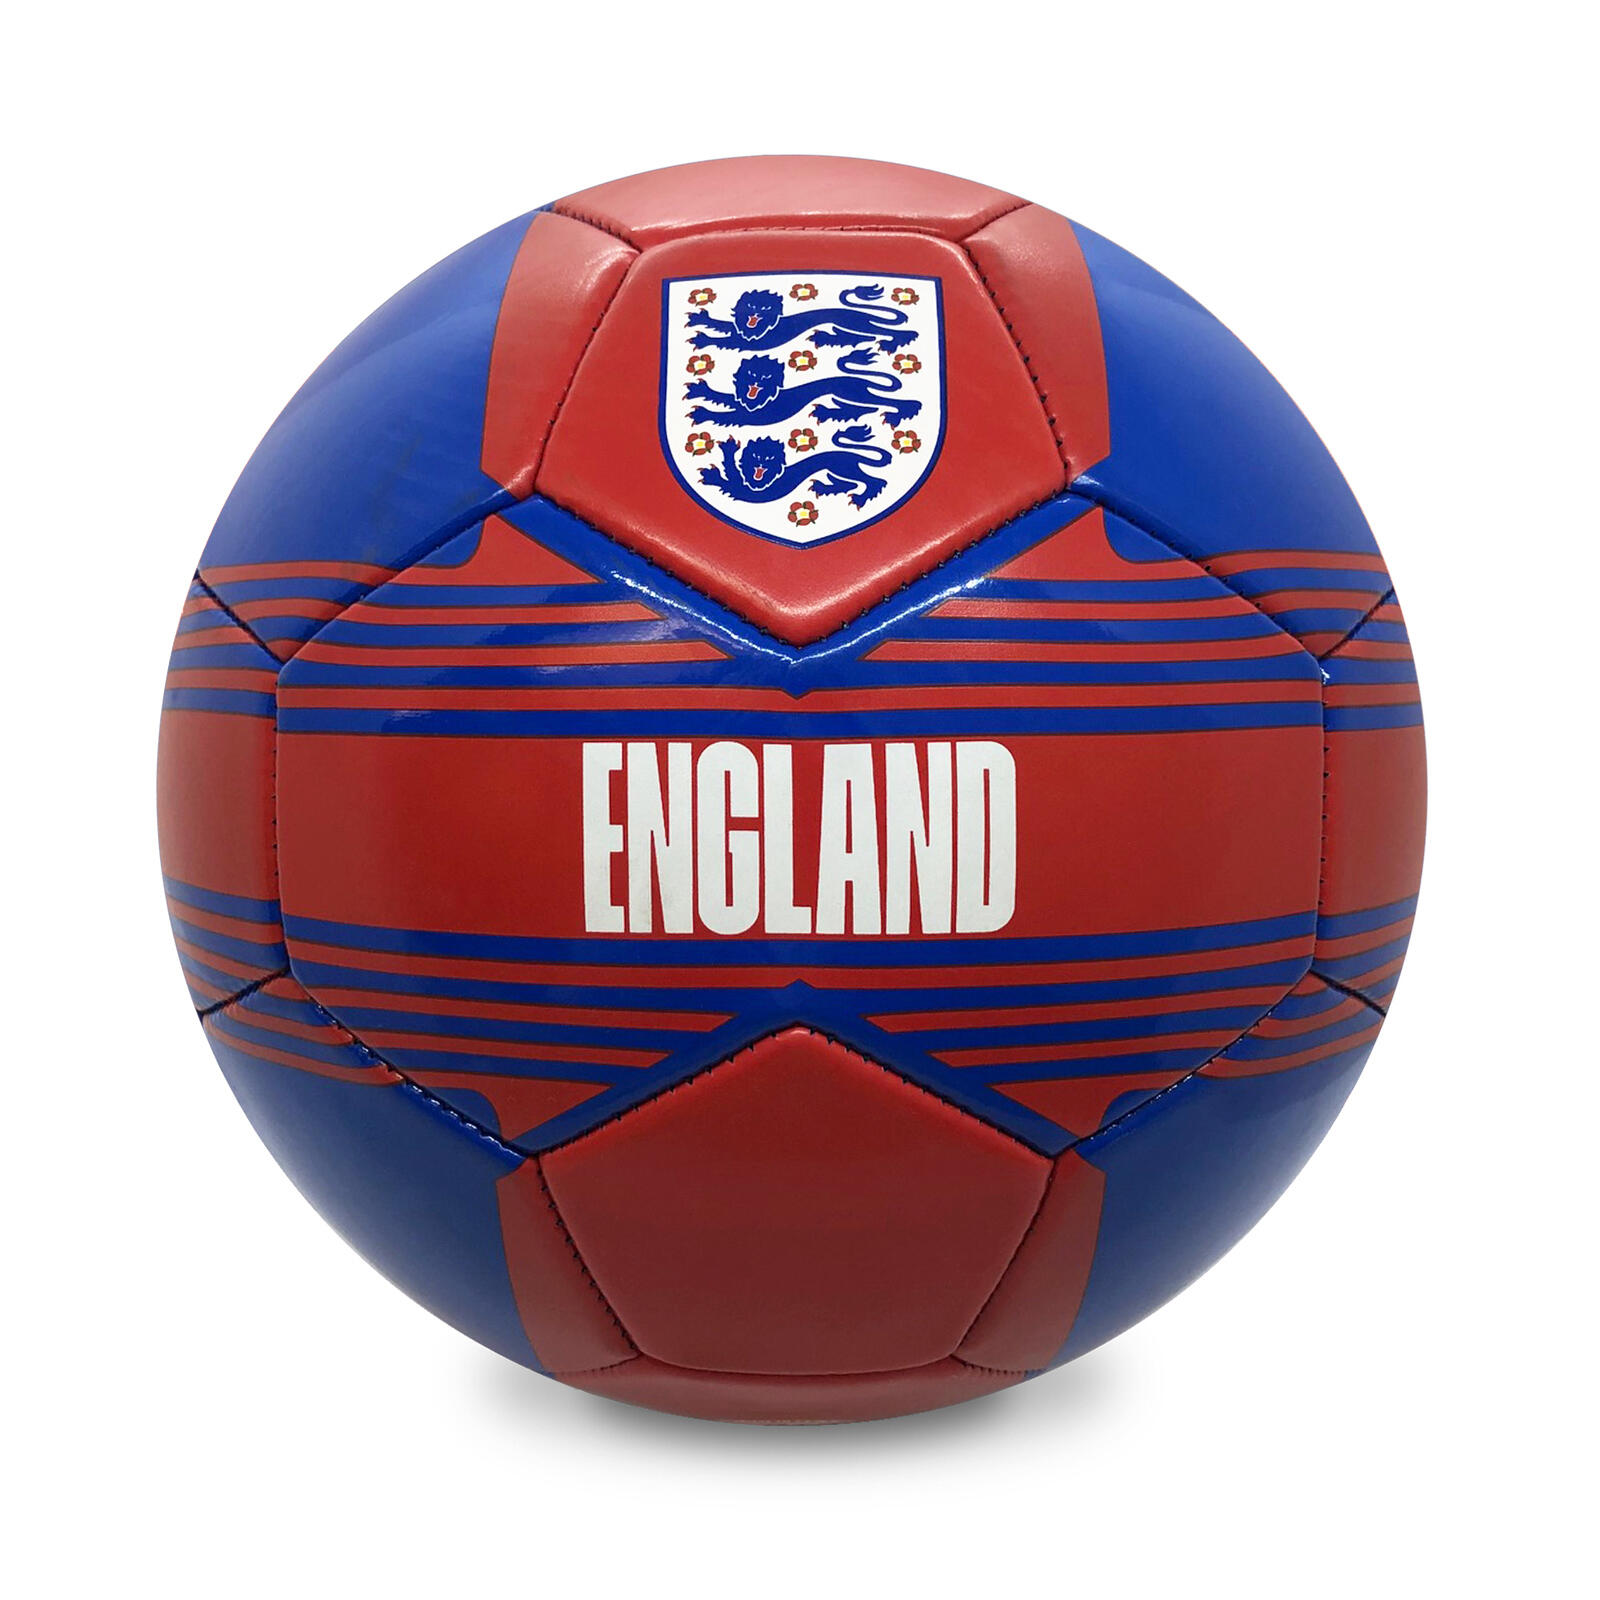 ENGLAND FOOTBALL ASSOCIATION England Football Size 4 Crest Red OFFICIAL Gift